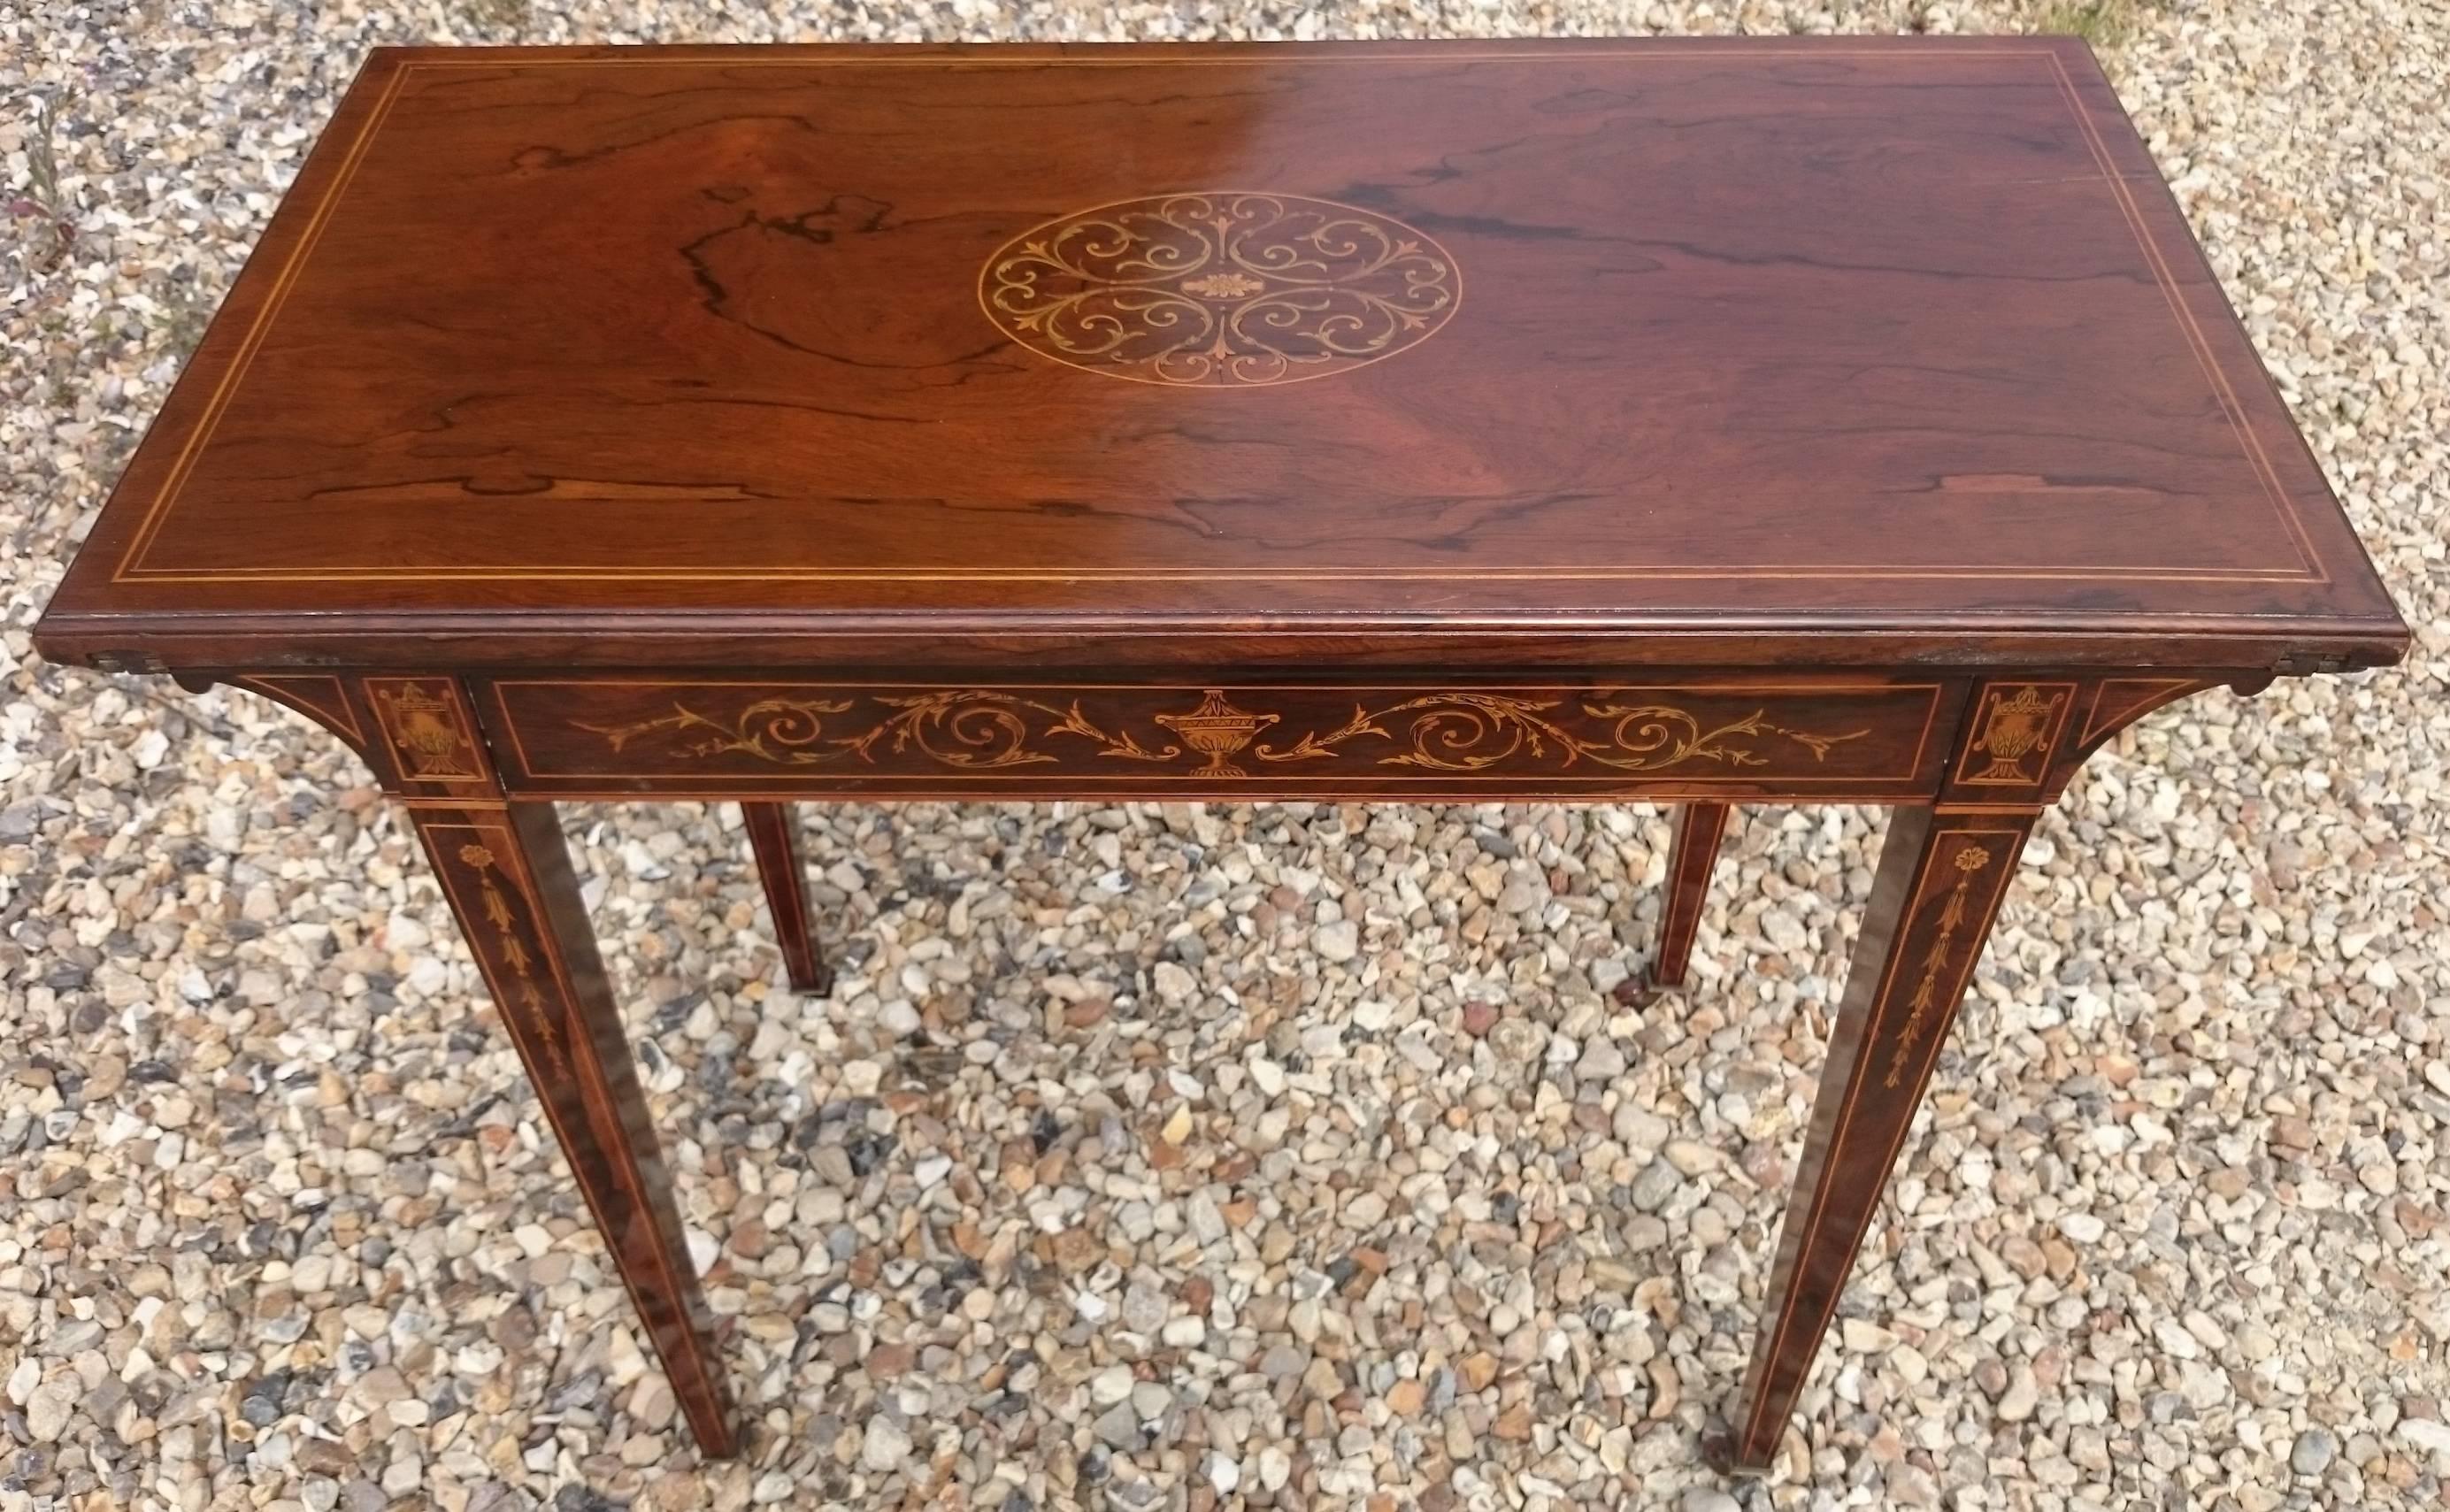 Edwardian Early 20th Century Antique Card Table with Fine Inlaid Decoration